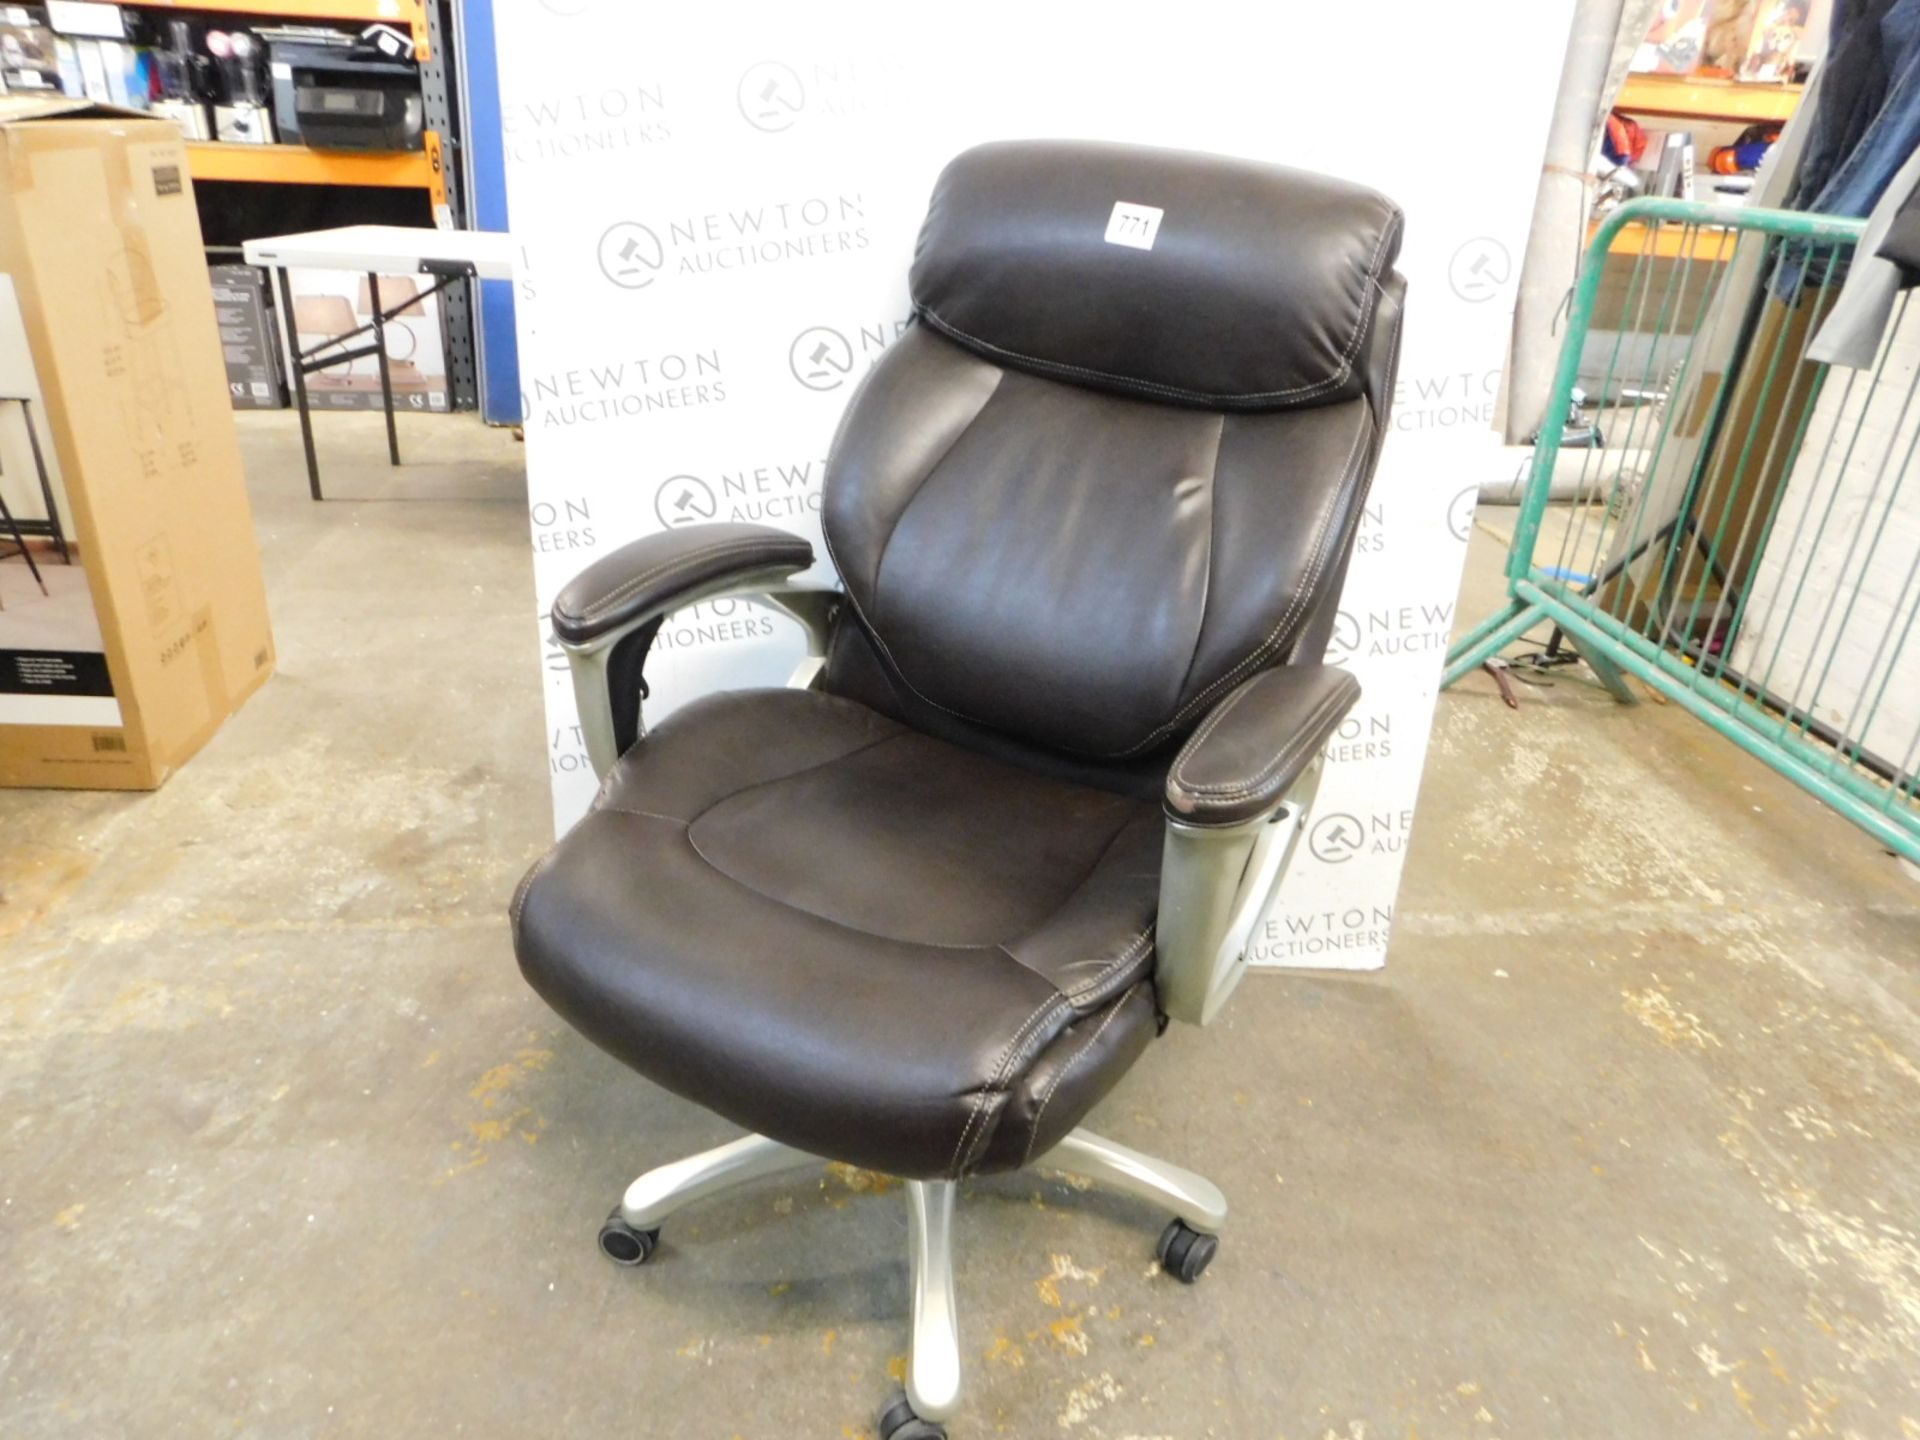 1 TRUE WELLNESS BROWN BONDED LEATHER GAS LIFT MANAGERS CHAIR WITH ACTIVE LUMBAR RRP Â£179.99